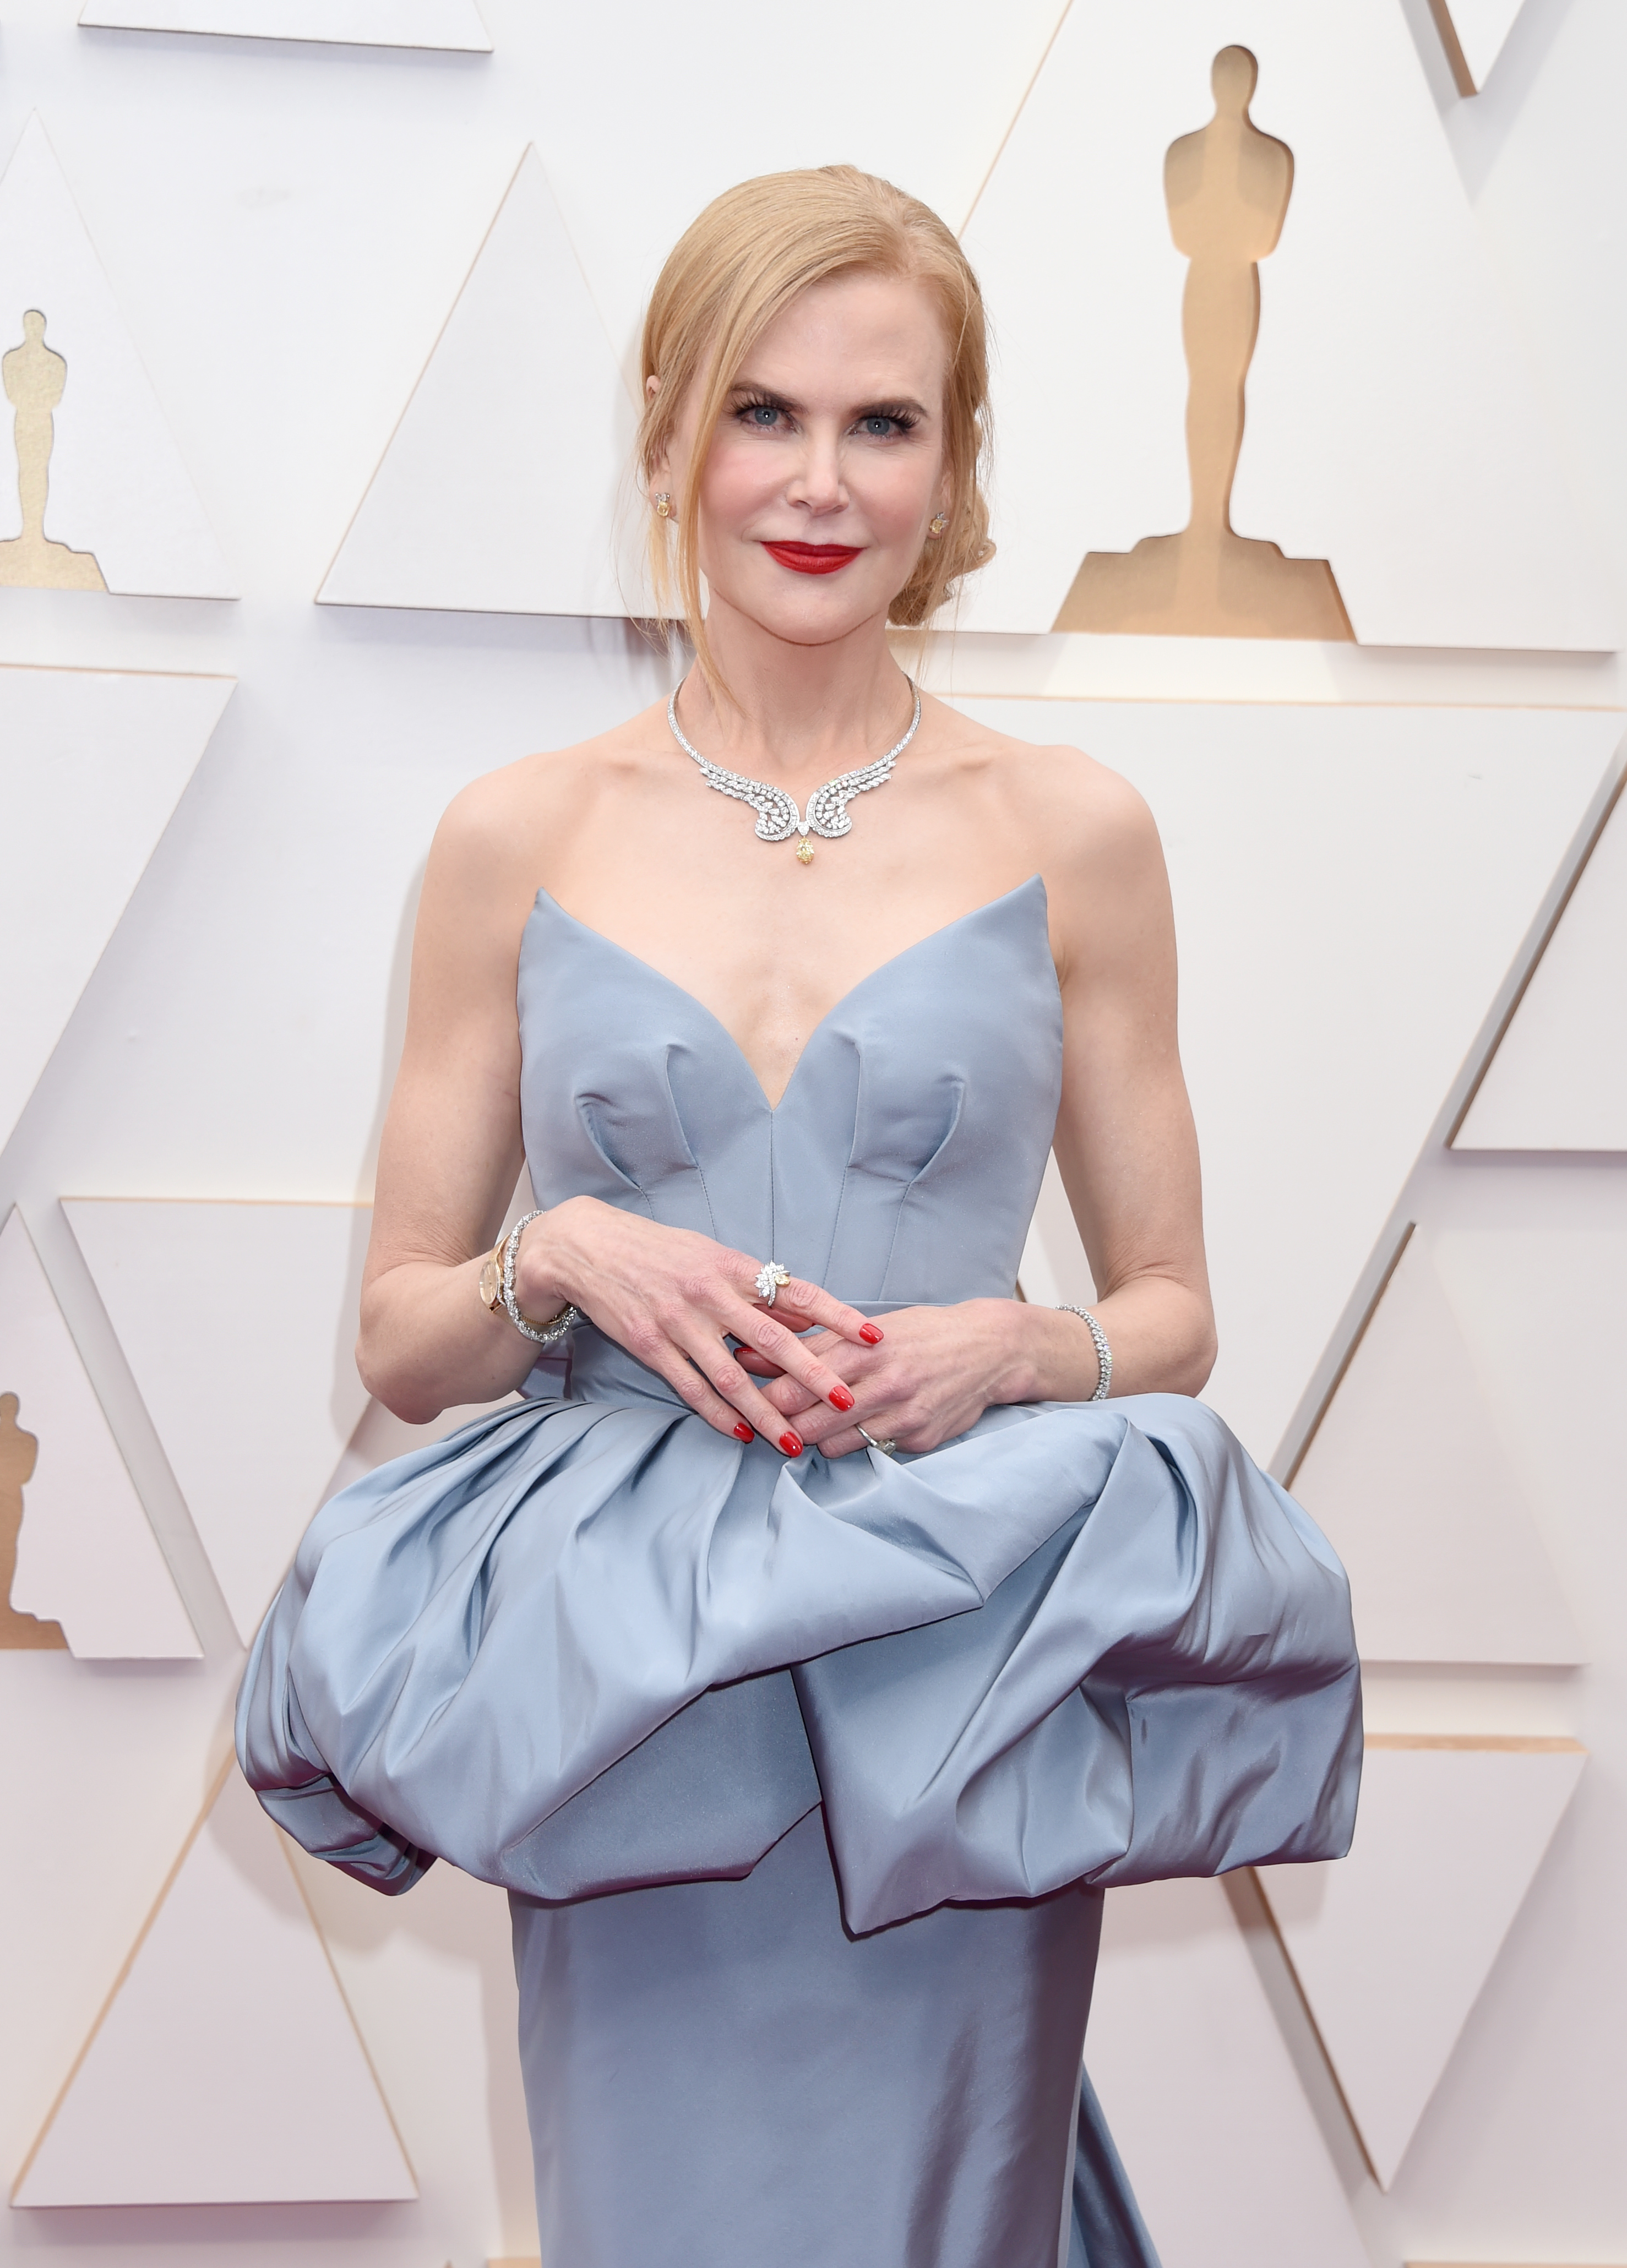 Nicole Kidman at the 94th Academy Awards at the Hollywood & Highland Center in Los Angeles, California, on March 27, 2022. | Source: Getty Images